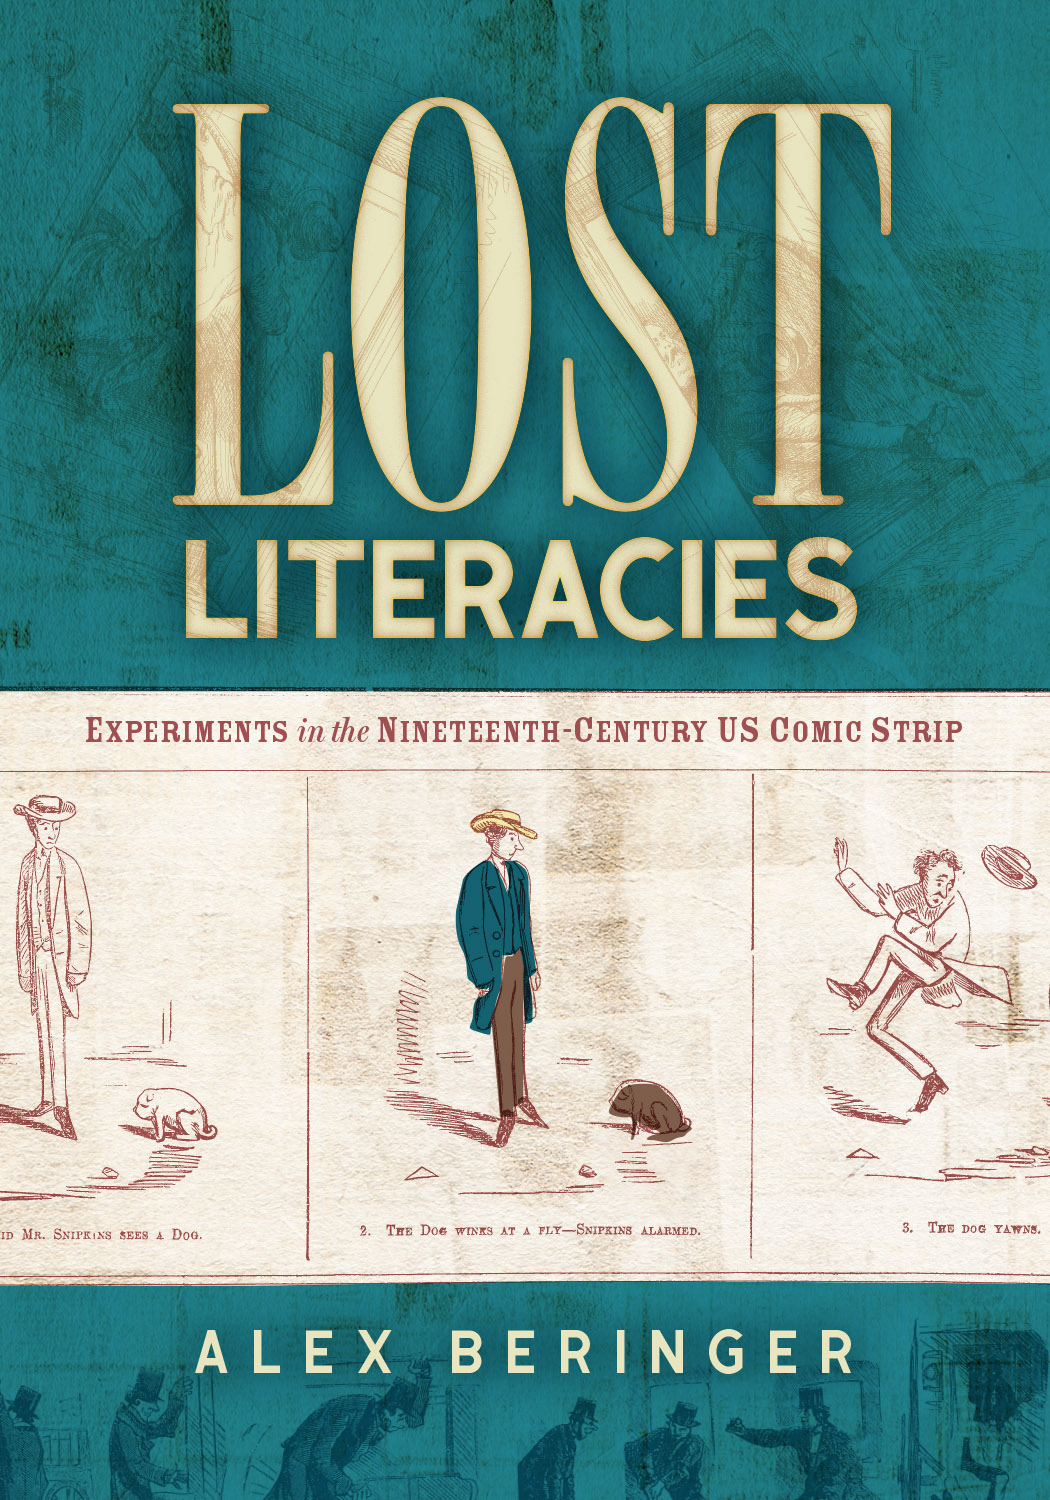 Front cover of Lost Literacies: Experiments in the Nineteenth-Century US Comic Strip by Alex Beringer, featuring an old-timey comic strip showing a man being scared by a dog.